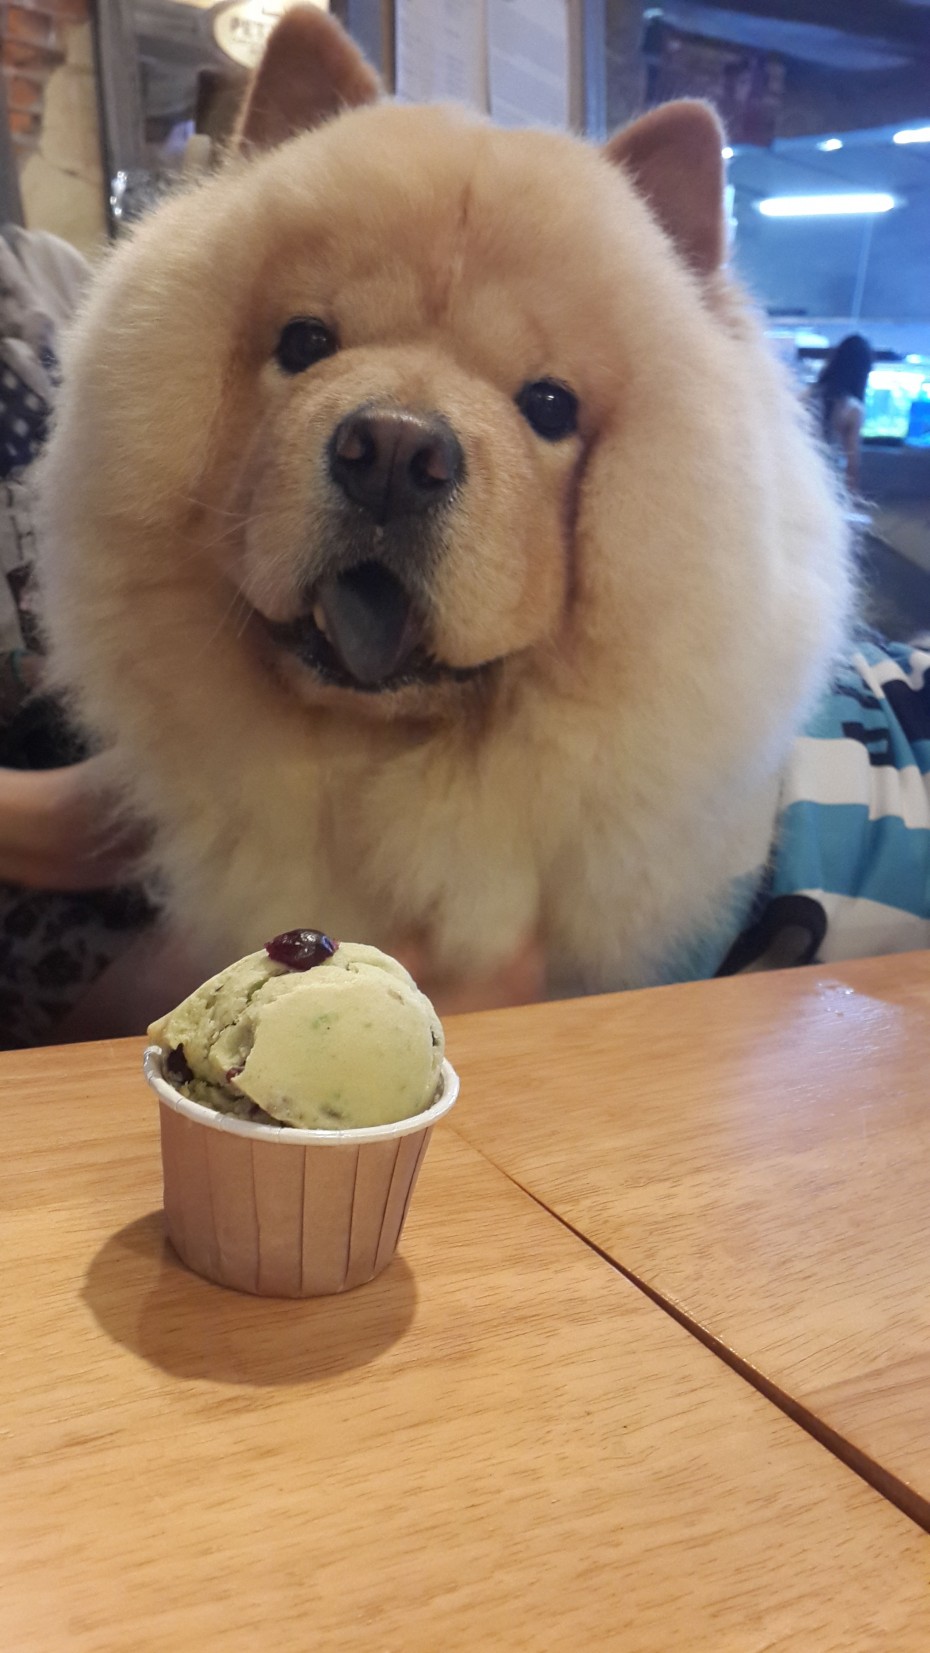 A cuddly customer at Blink Pets Bakery poses with his muffin. - Photo: Jeffrey Tiong